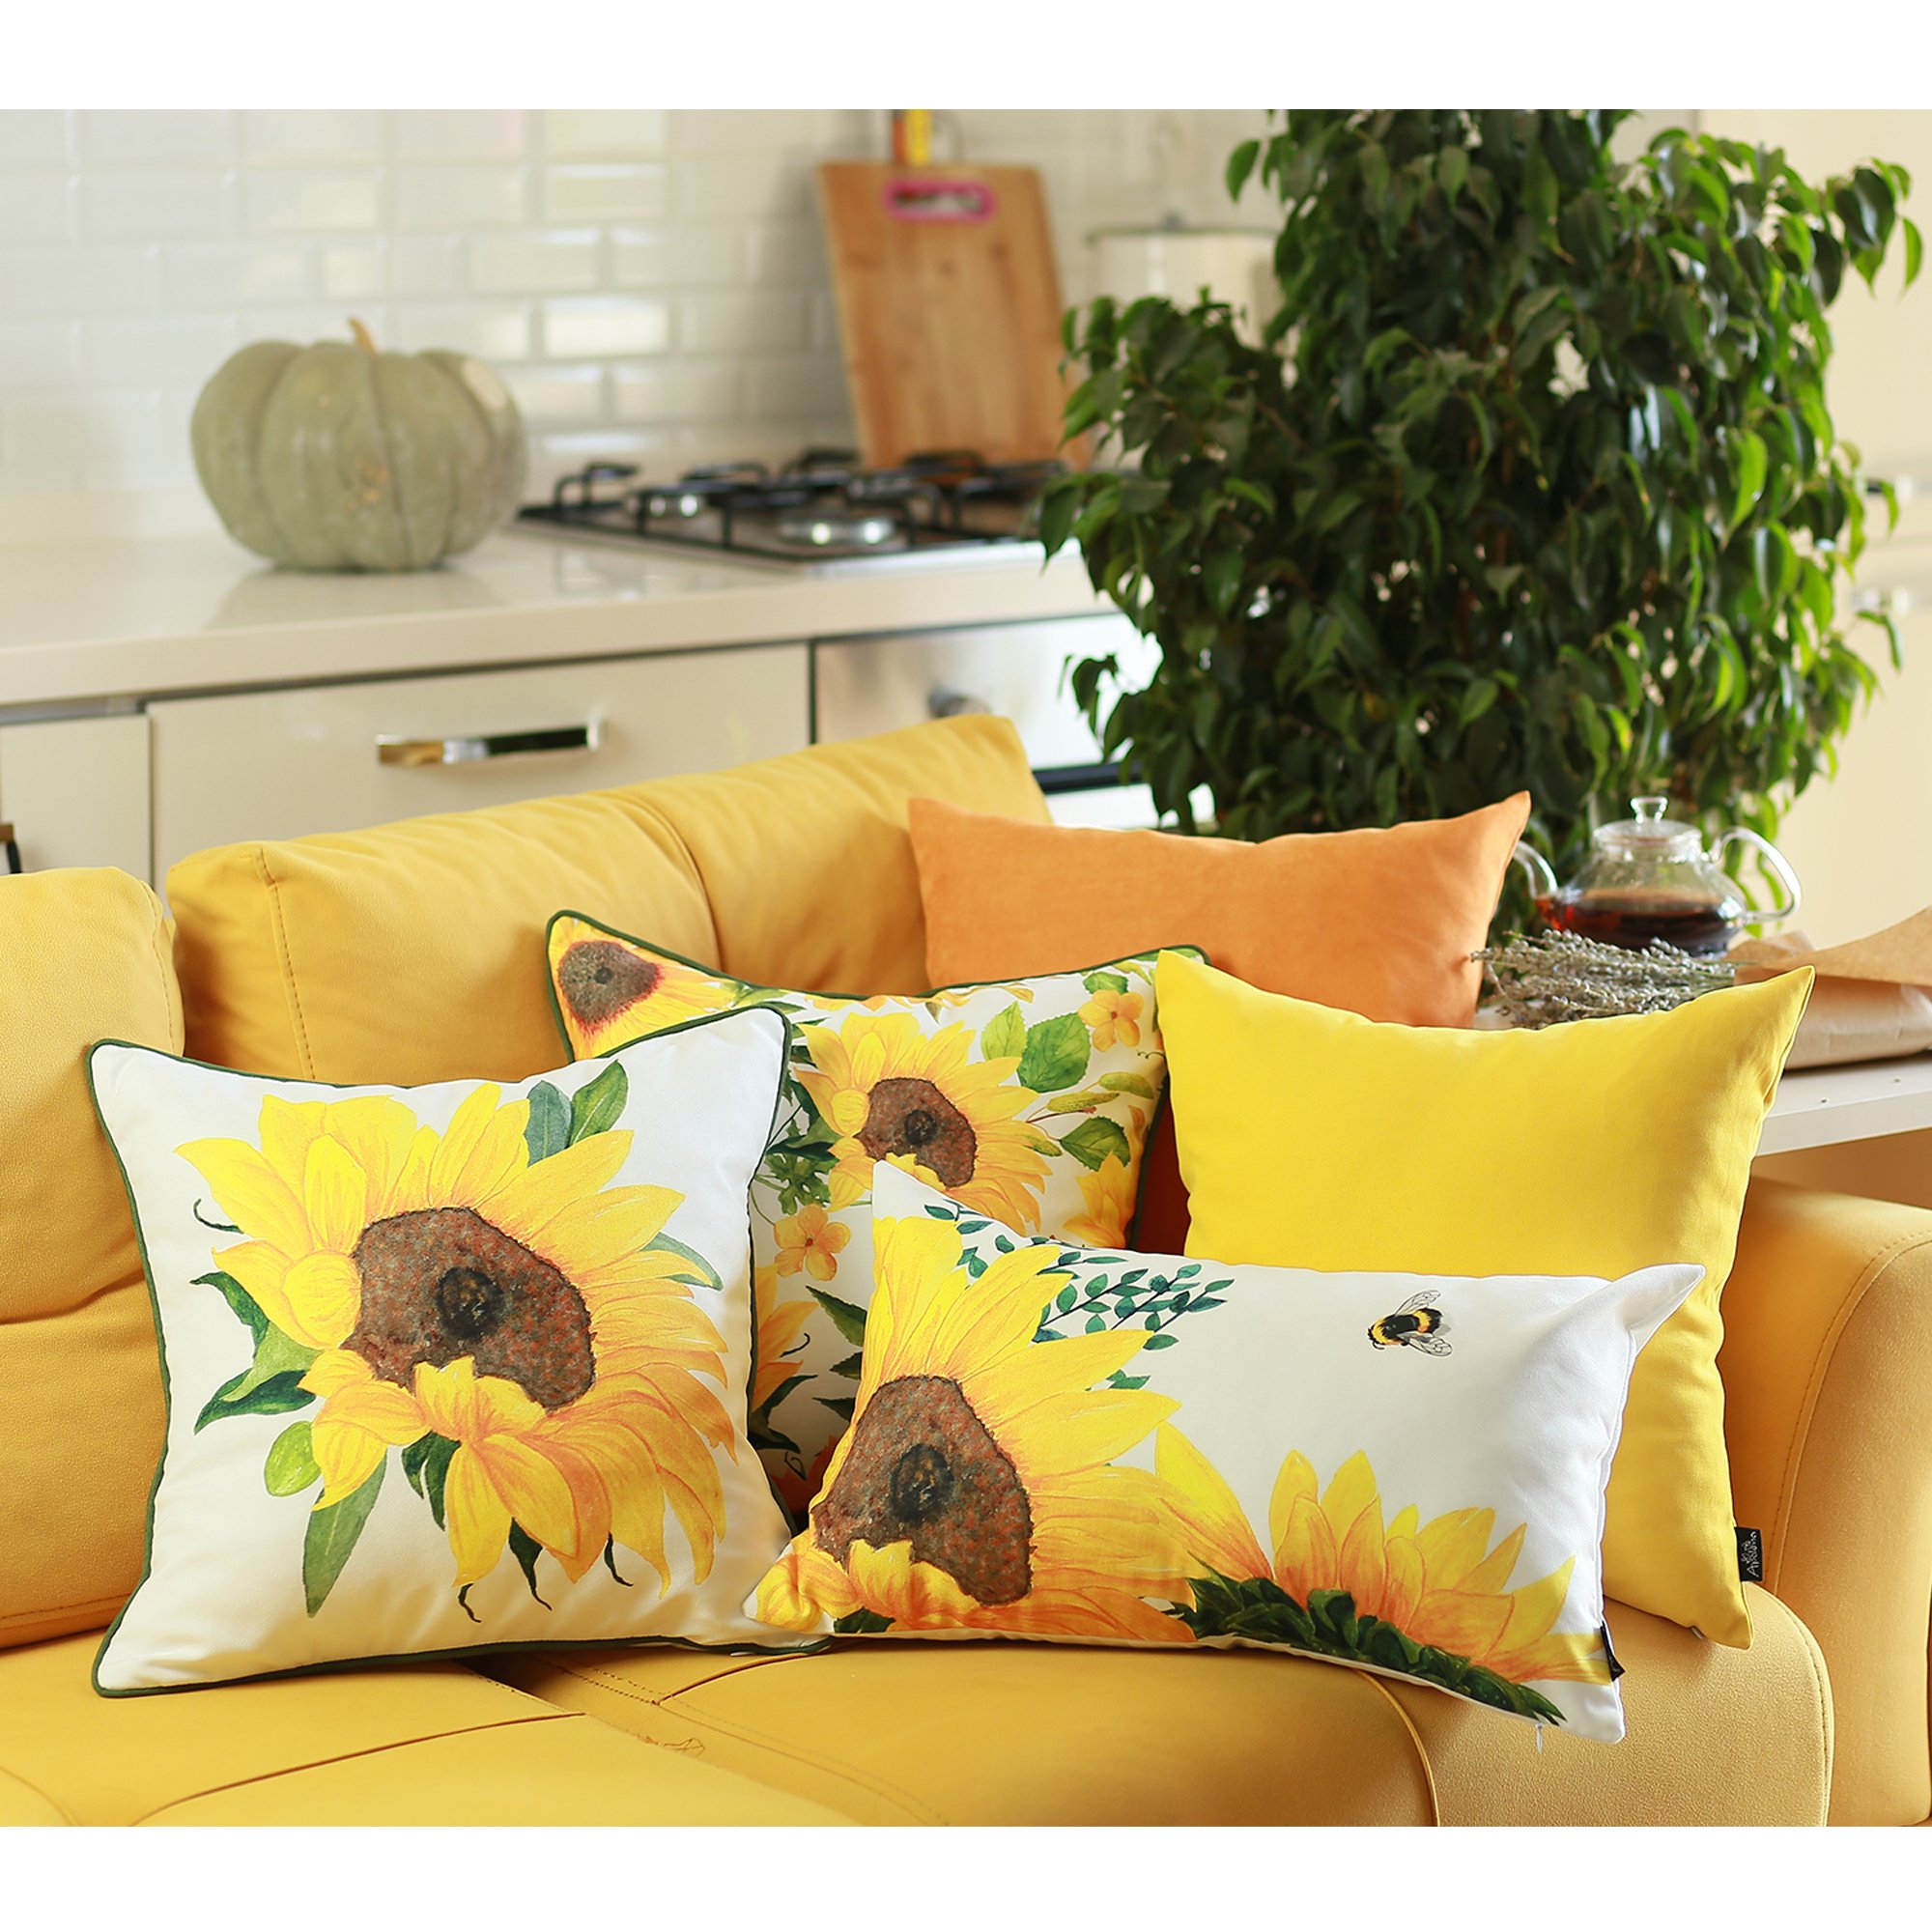 Set of 2 20" Sunflower Bee Lumbar Pillow Cover in Multicolor